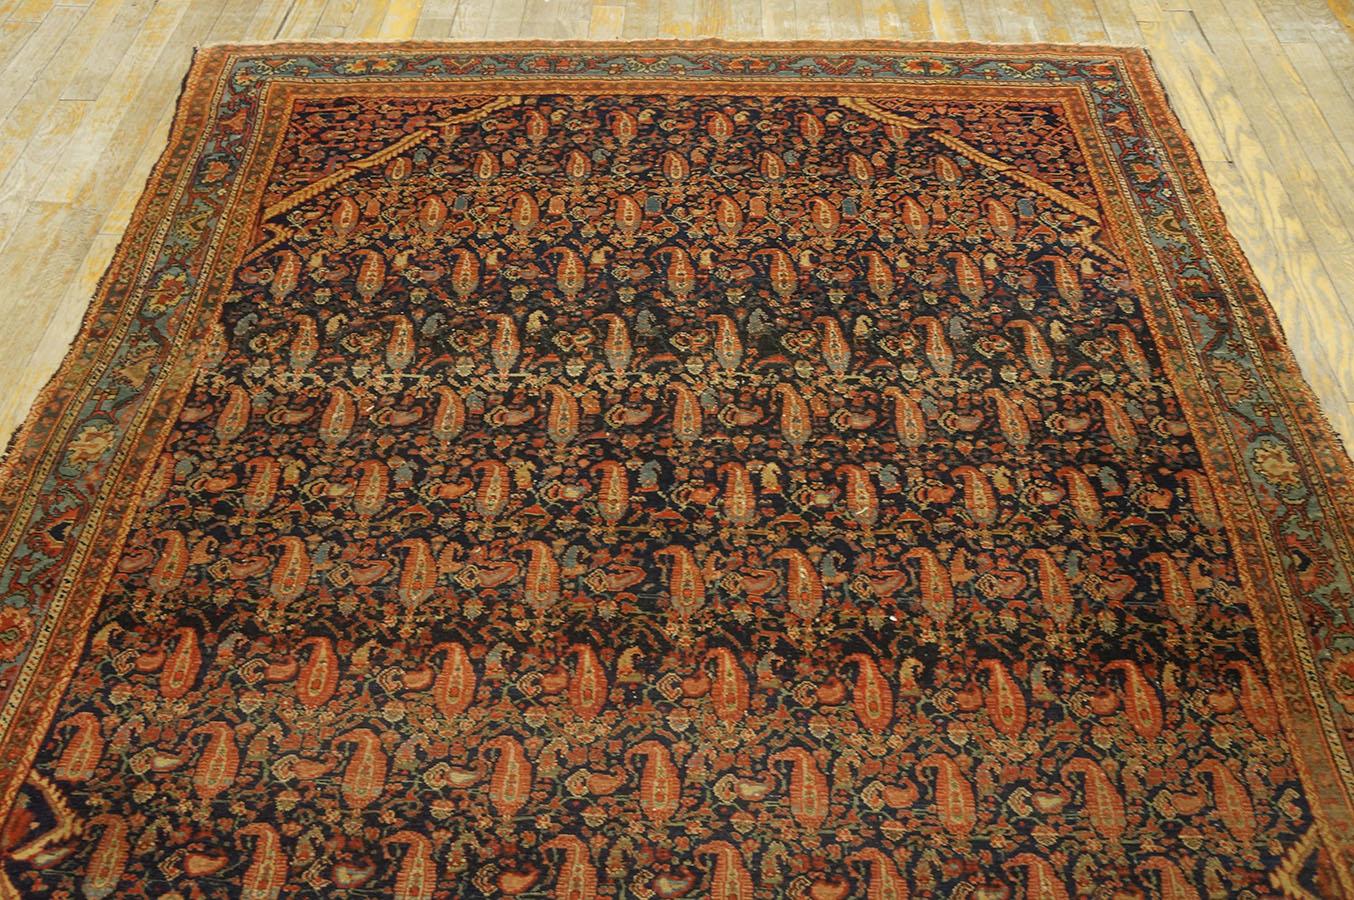 Late 19th Century Persian Malayer Carpet ( 5' x 6' 2'' - 152 x 188 cm ) In Good Condition For Sale In New York, NY